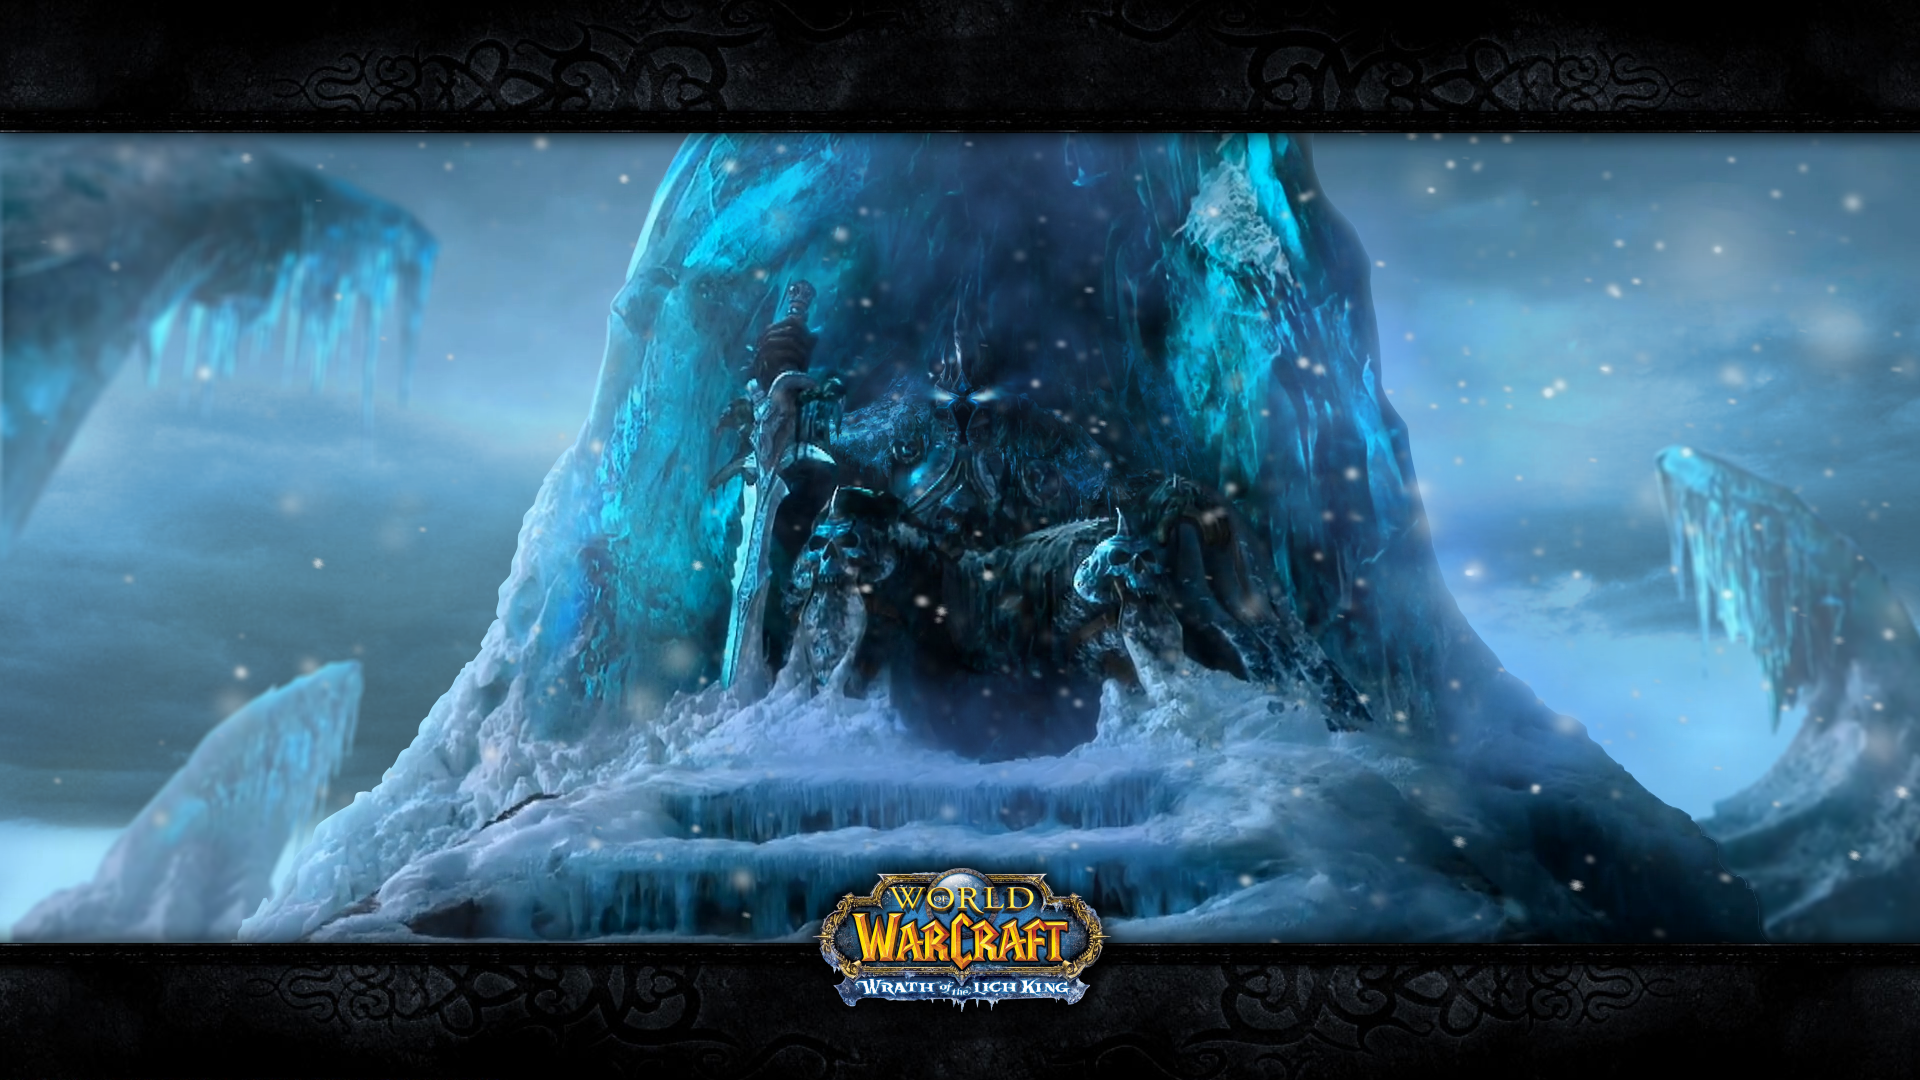 The Frozen Throne - Animated Wallpaper by PaulWhipps on DeviantArt